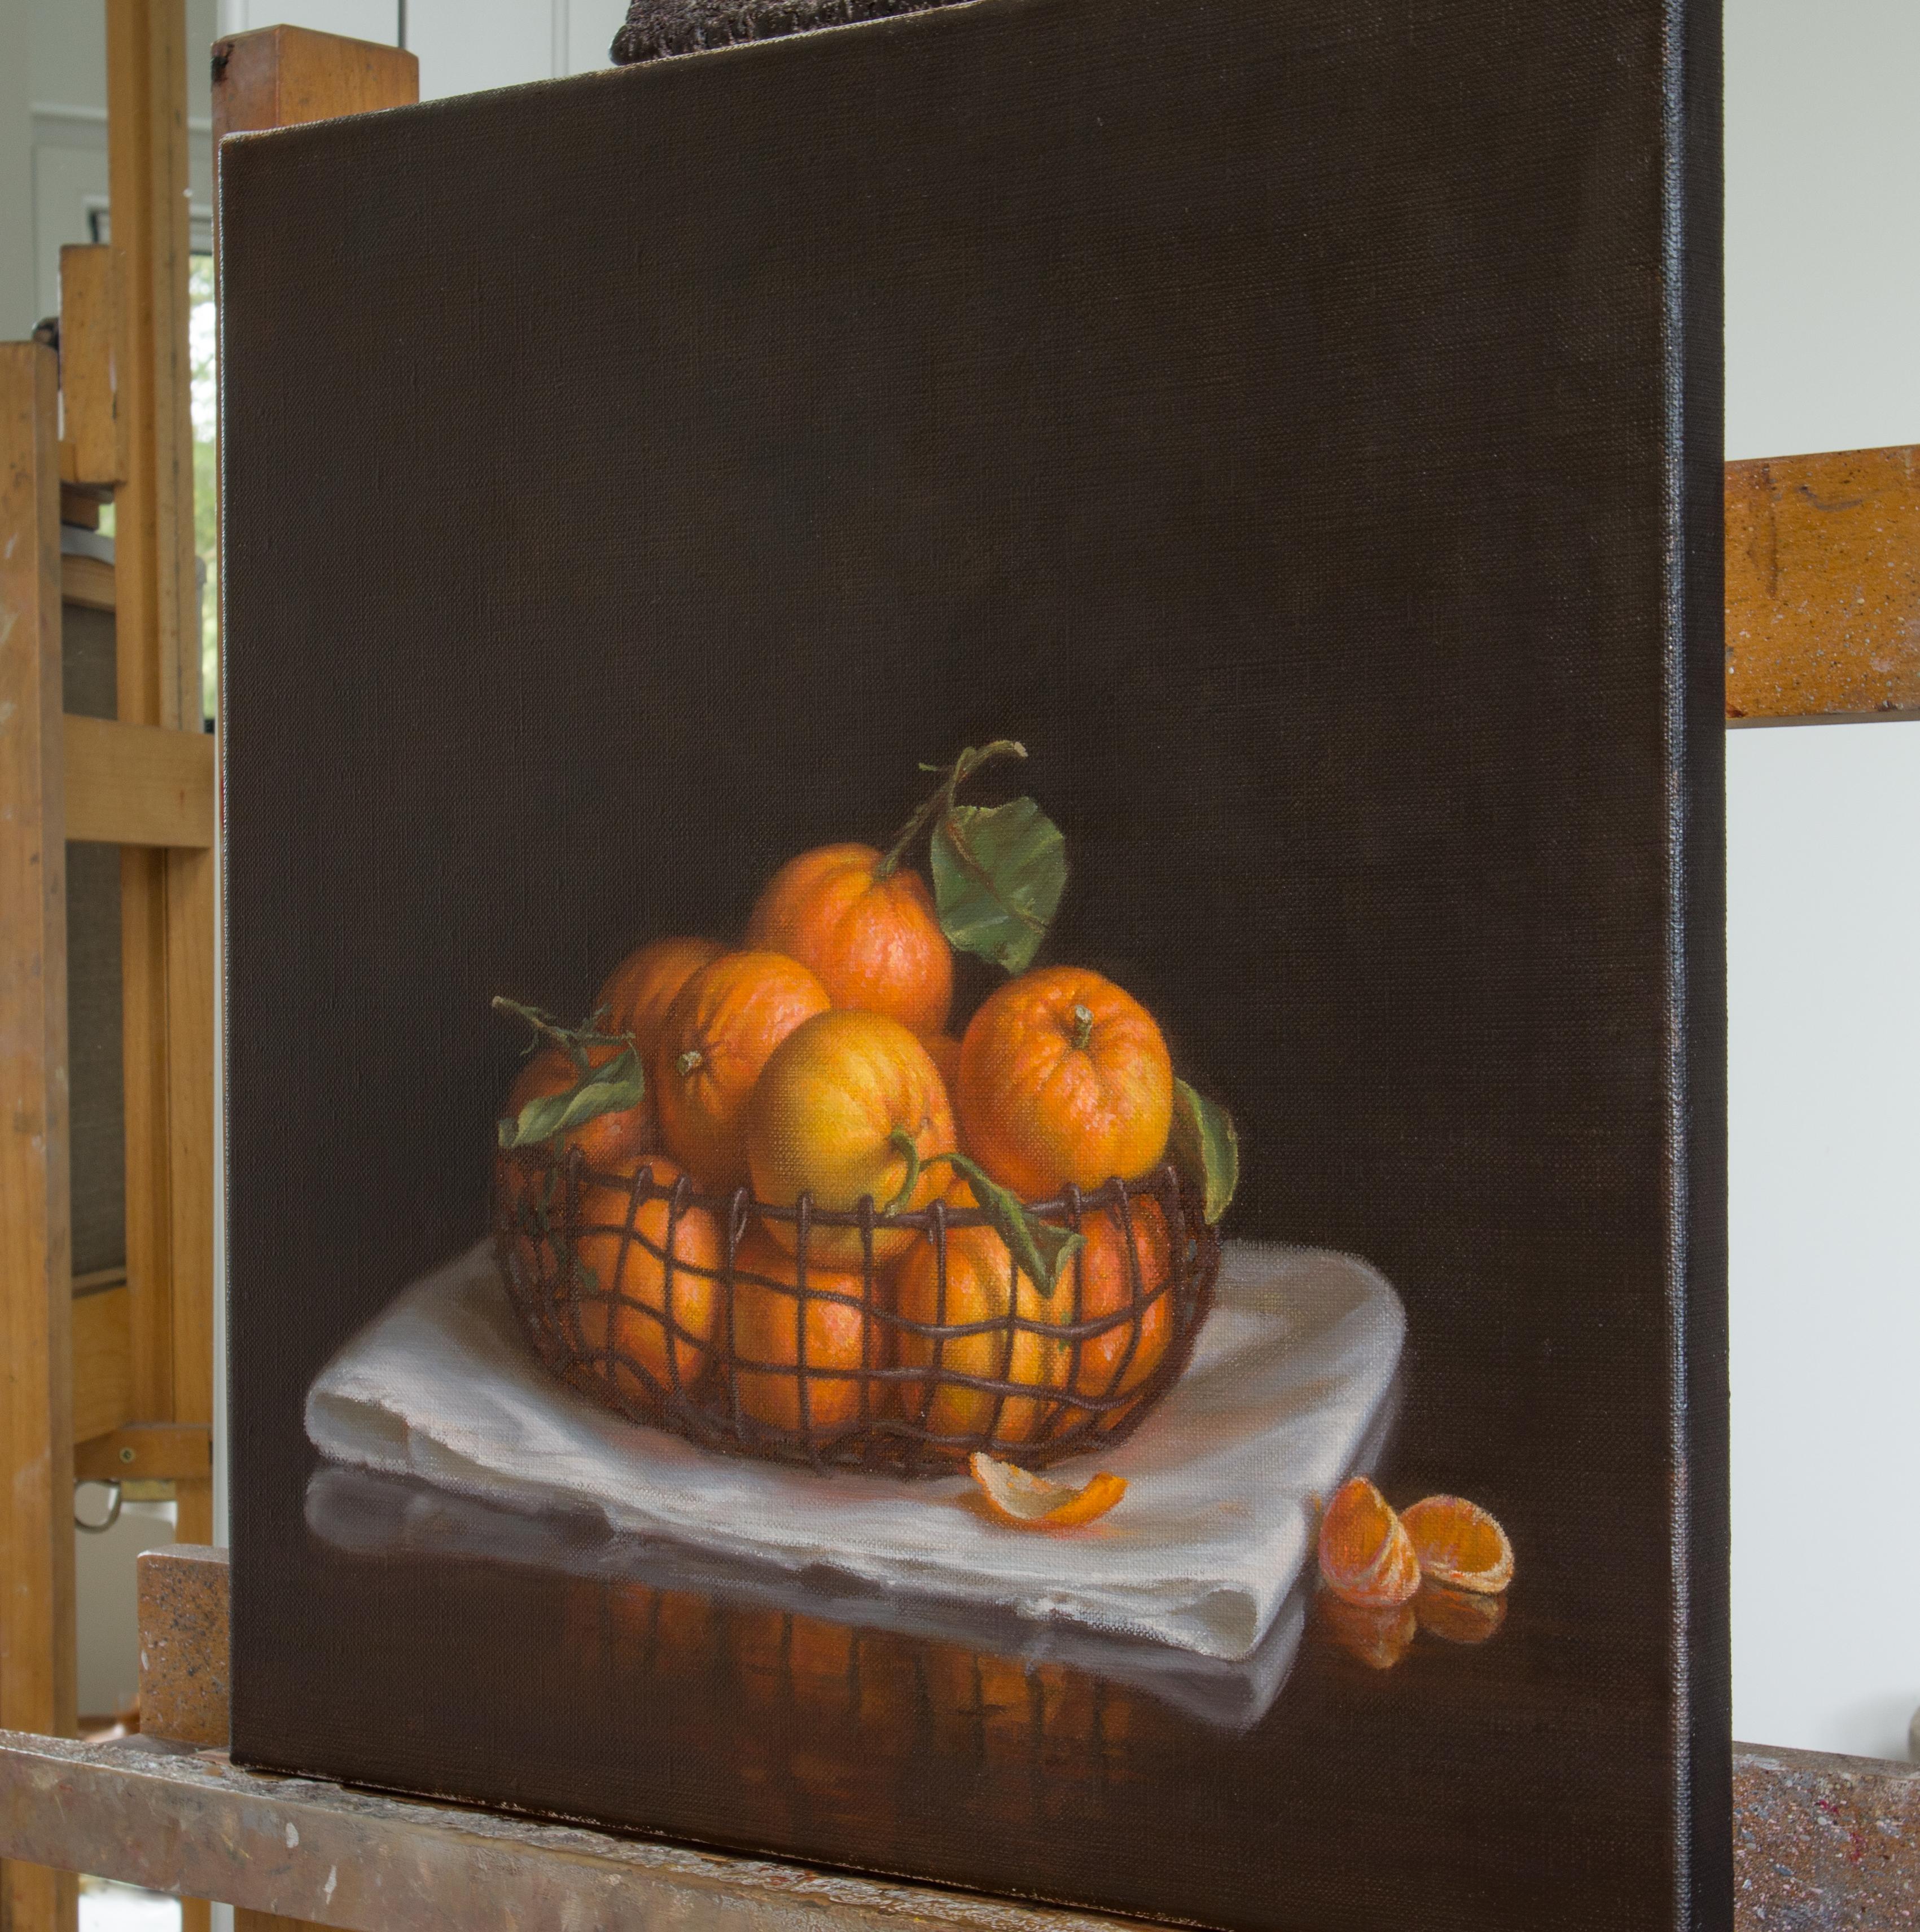 “Basket with tangerines” is a work that pays homage to the natural beauty and timeless elegance of this luscious fruit. Painted with great precision and a keen eye for detail, this masterpiece exudes a contemporary realism infused with the spirit of